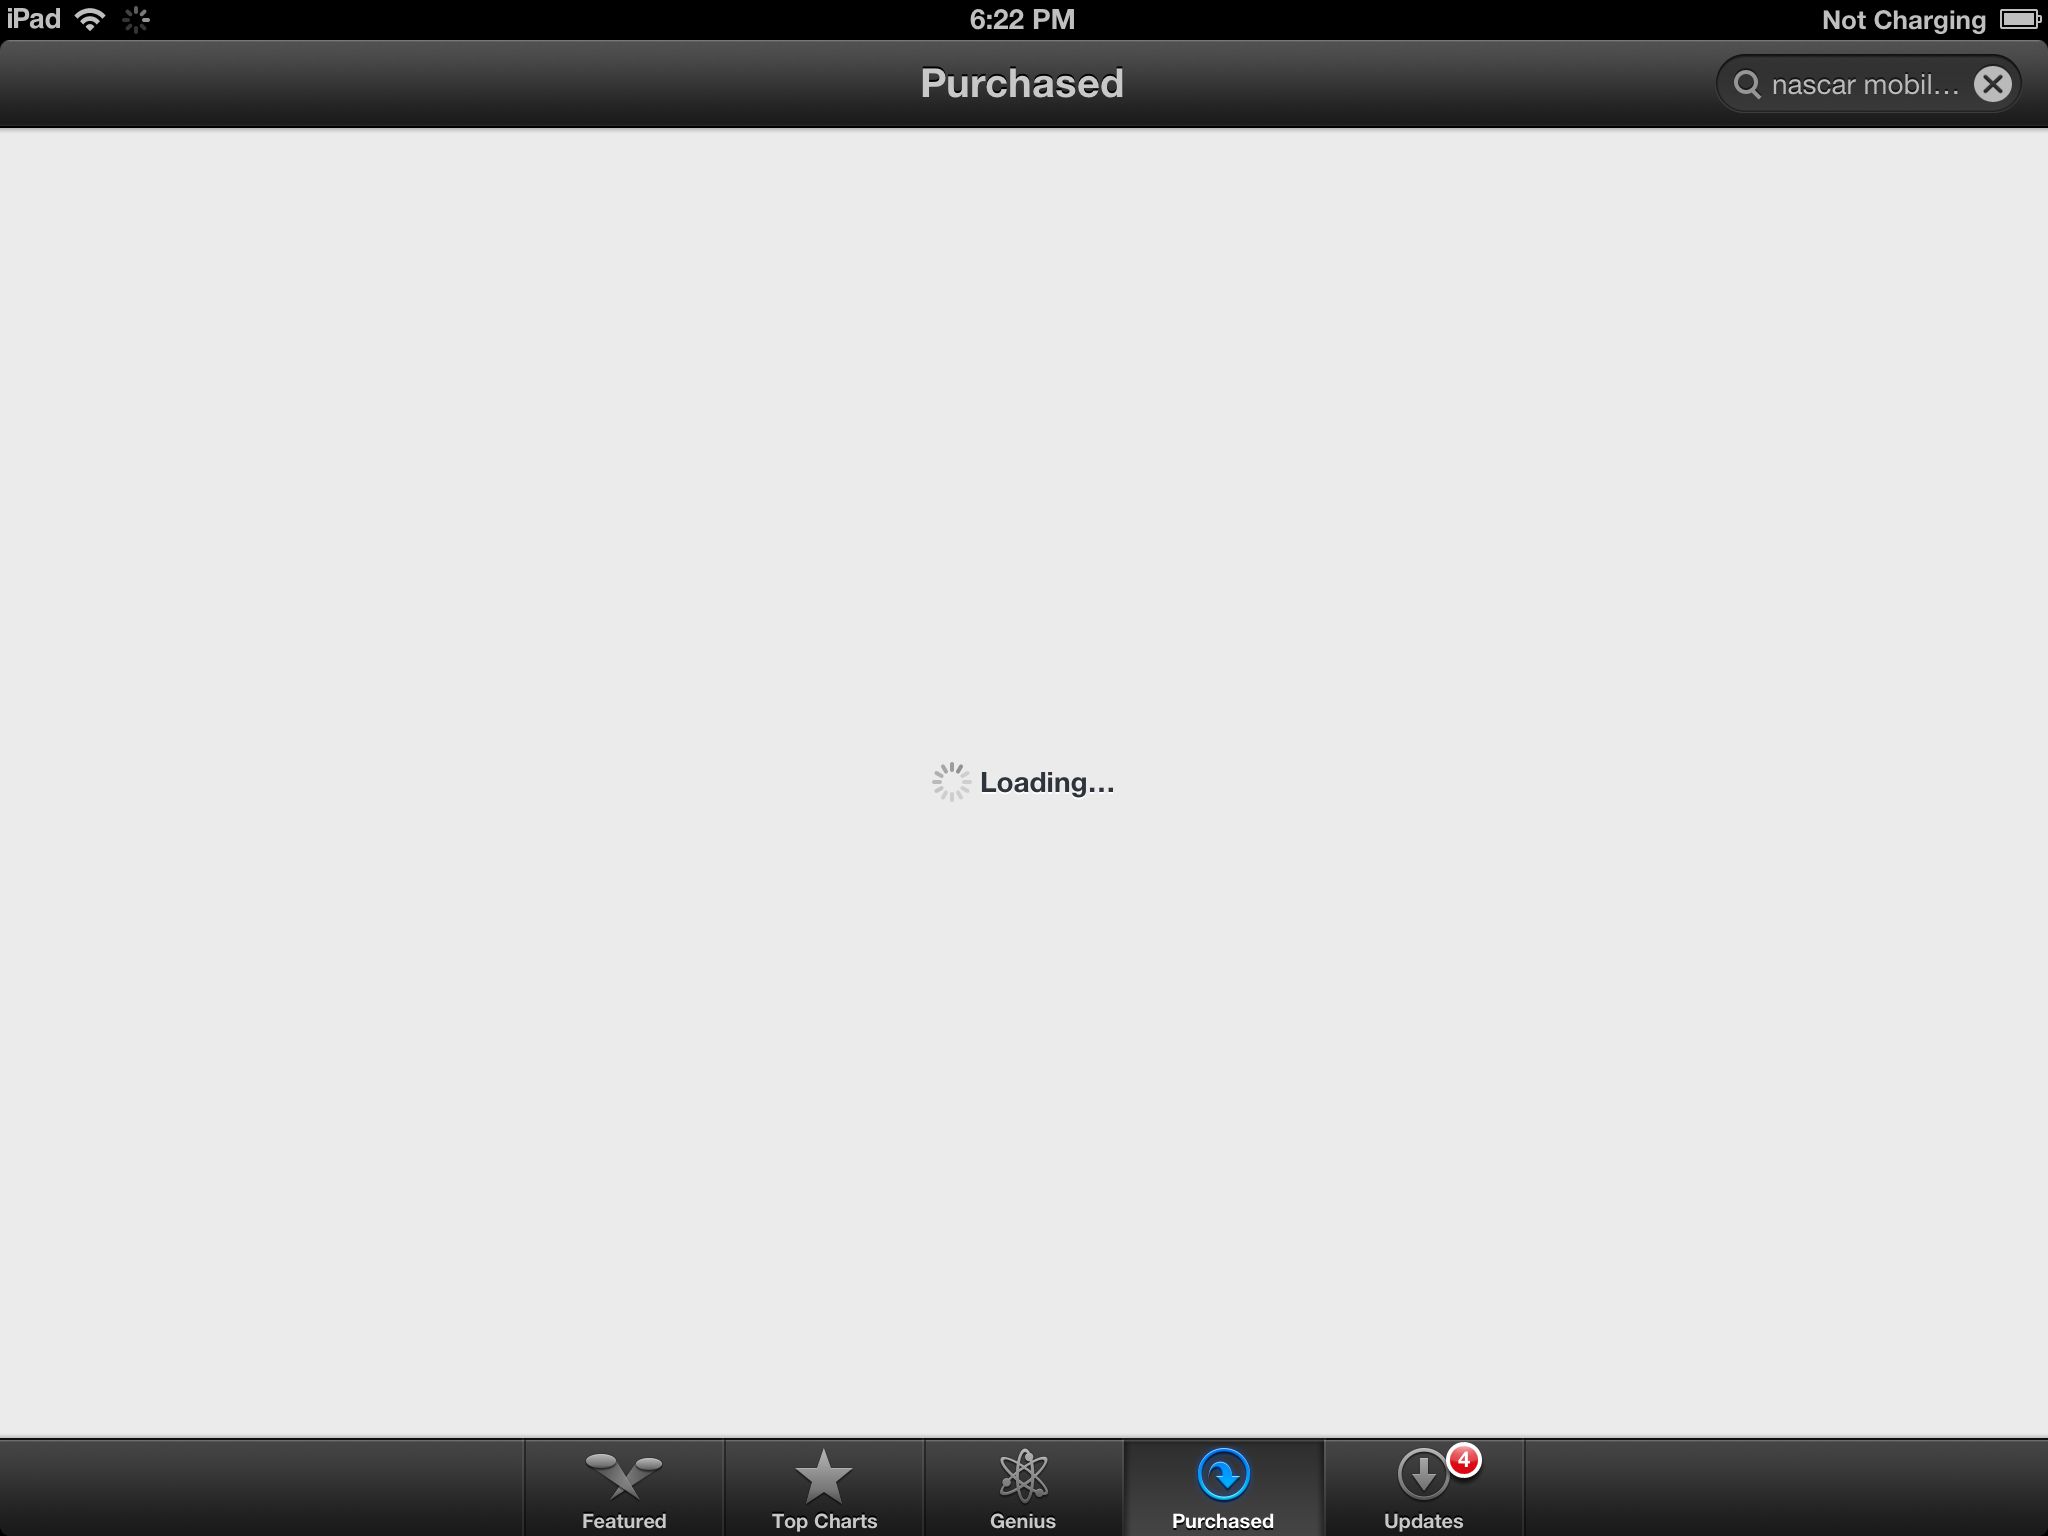 ipad app store purchased apps section fails in ios 6